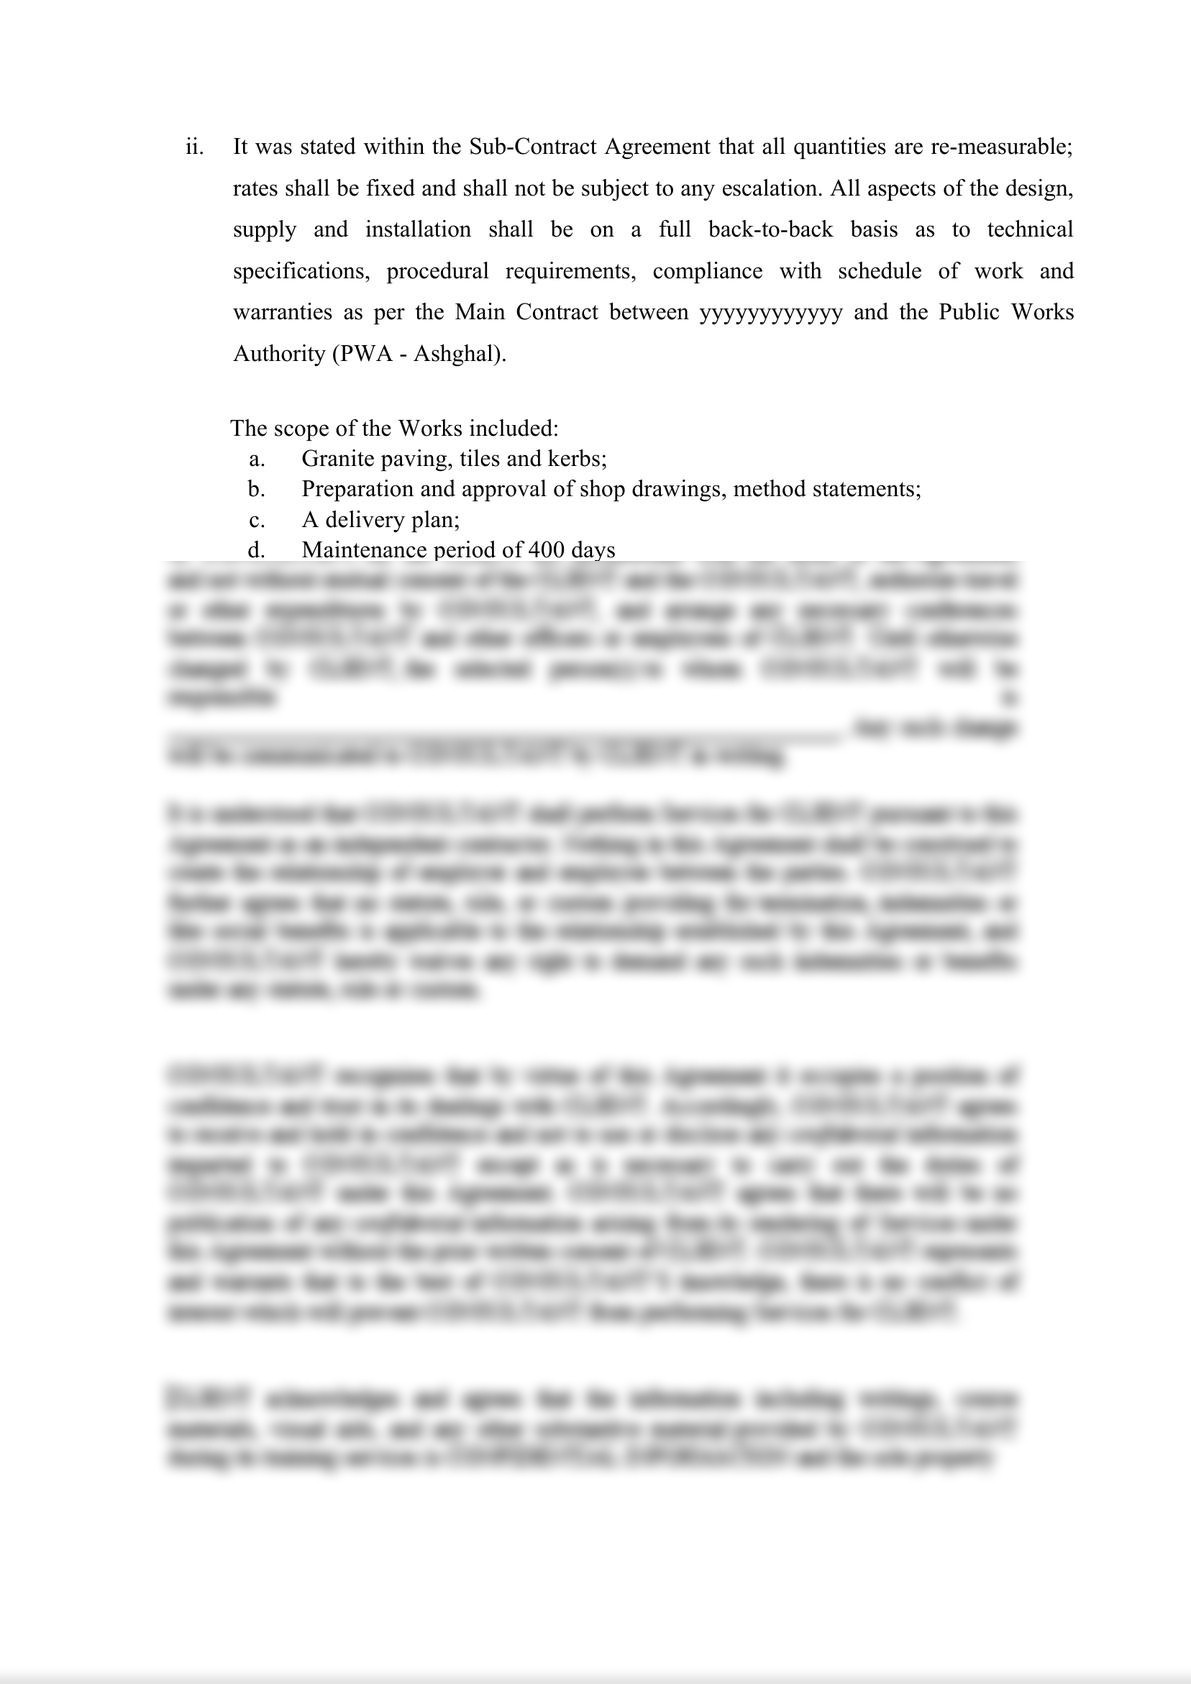 ICC-Request-for-Arbitration-4